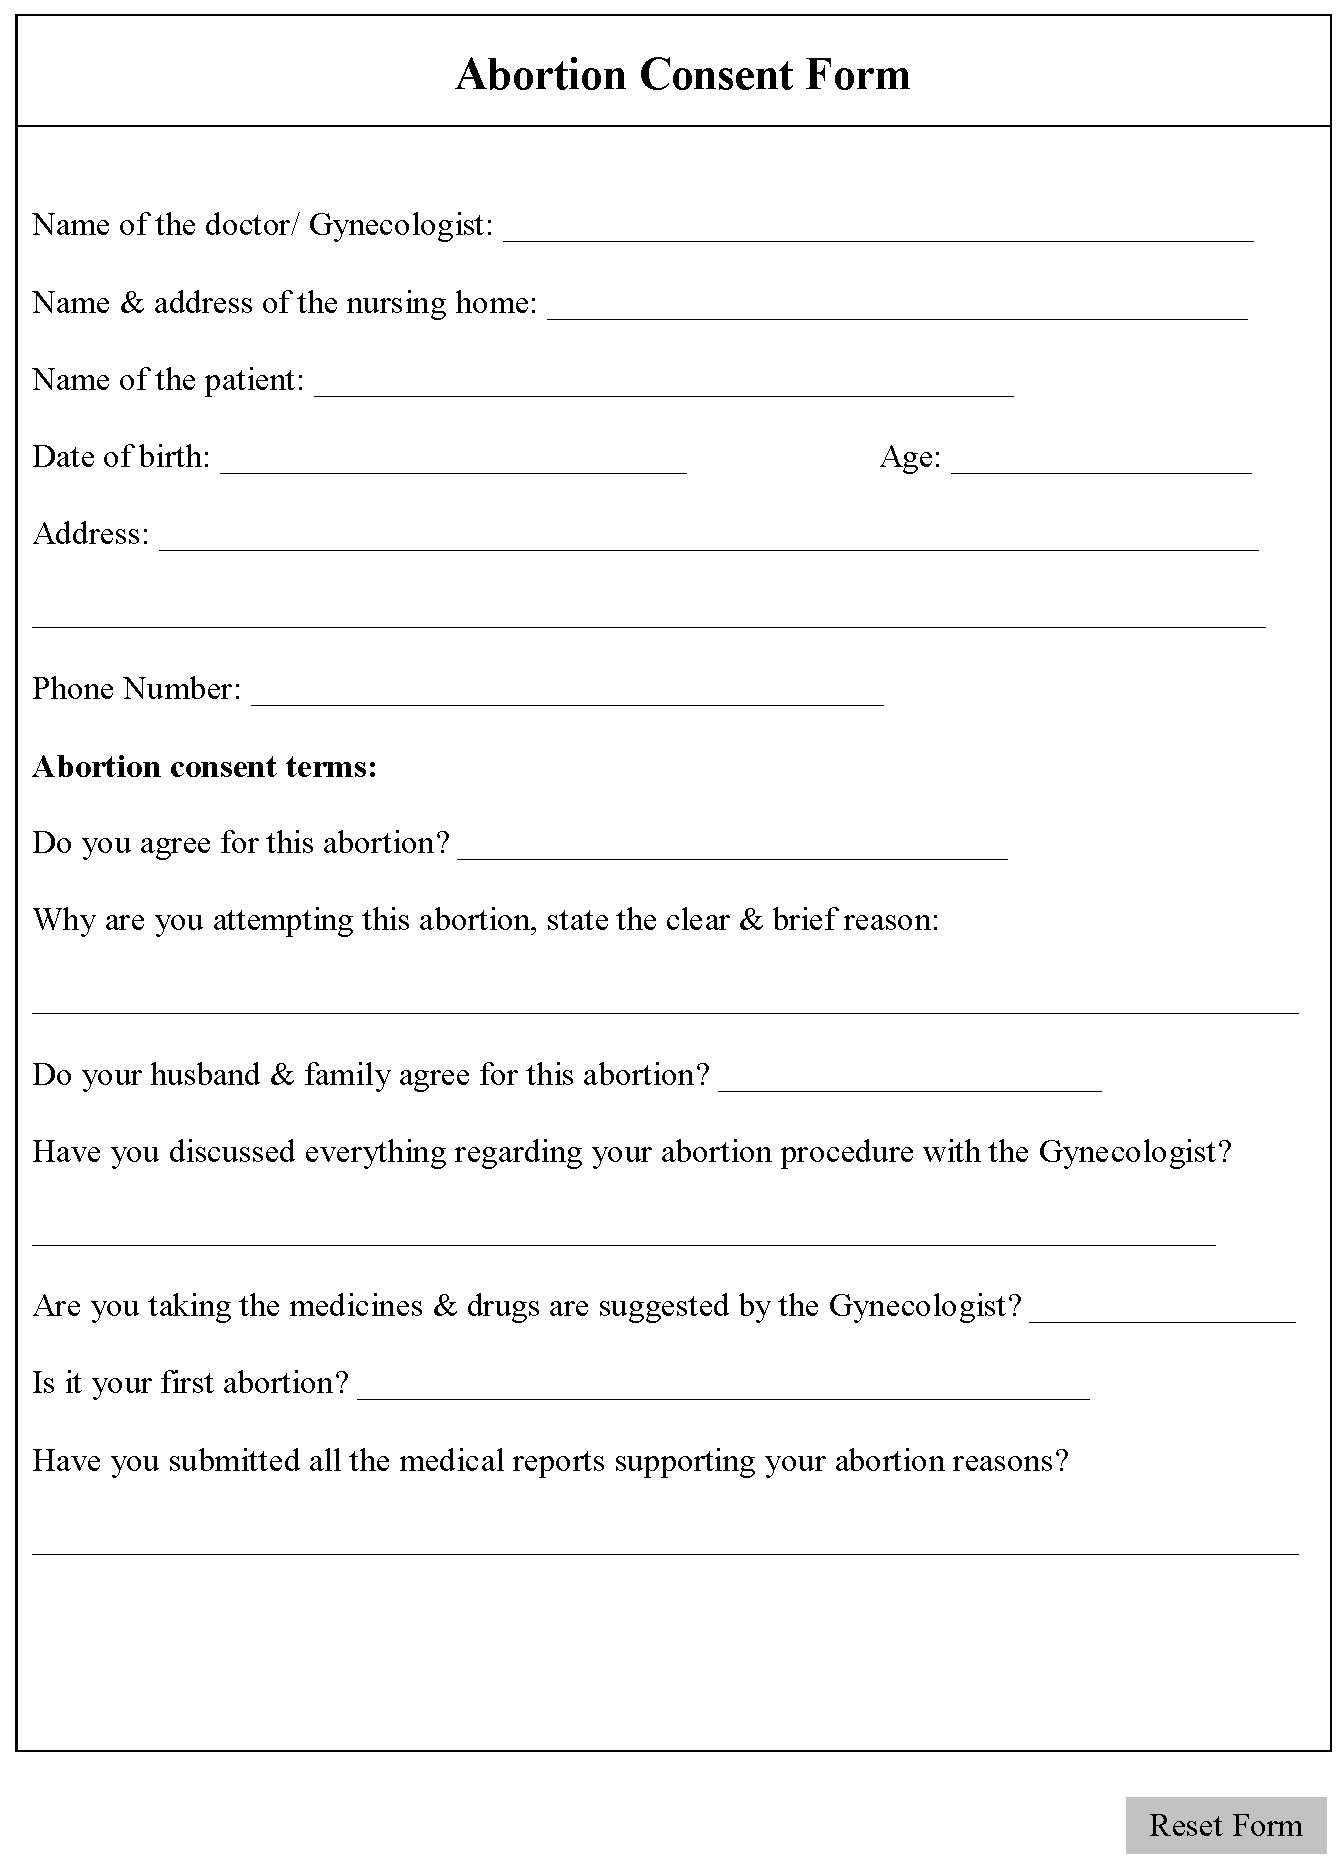 abortion consent form